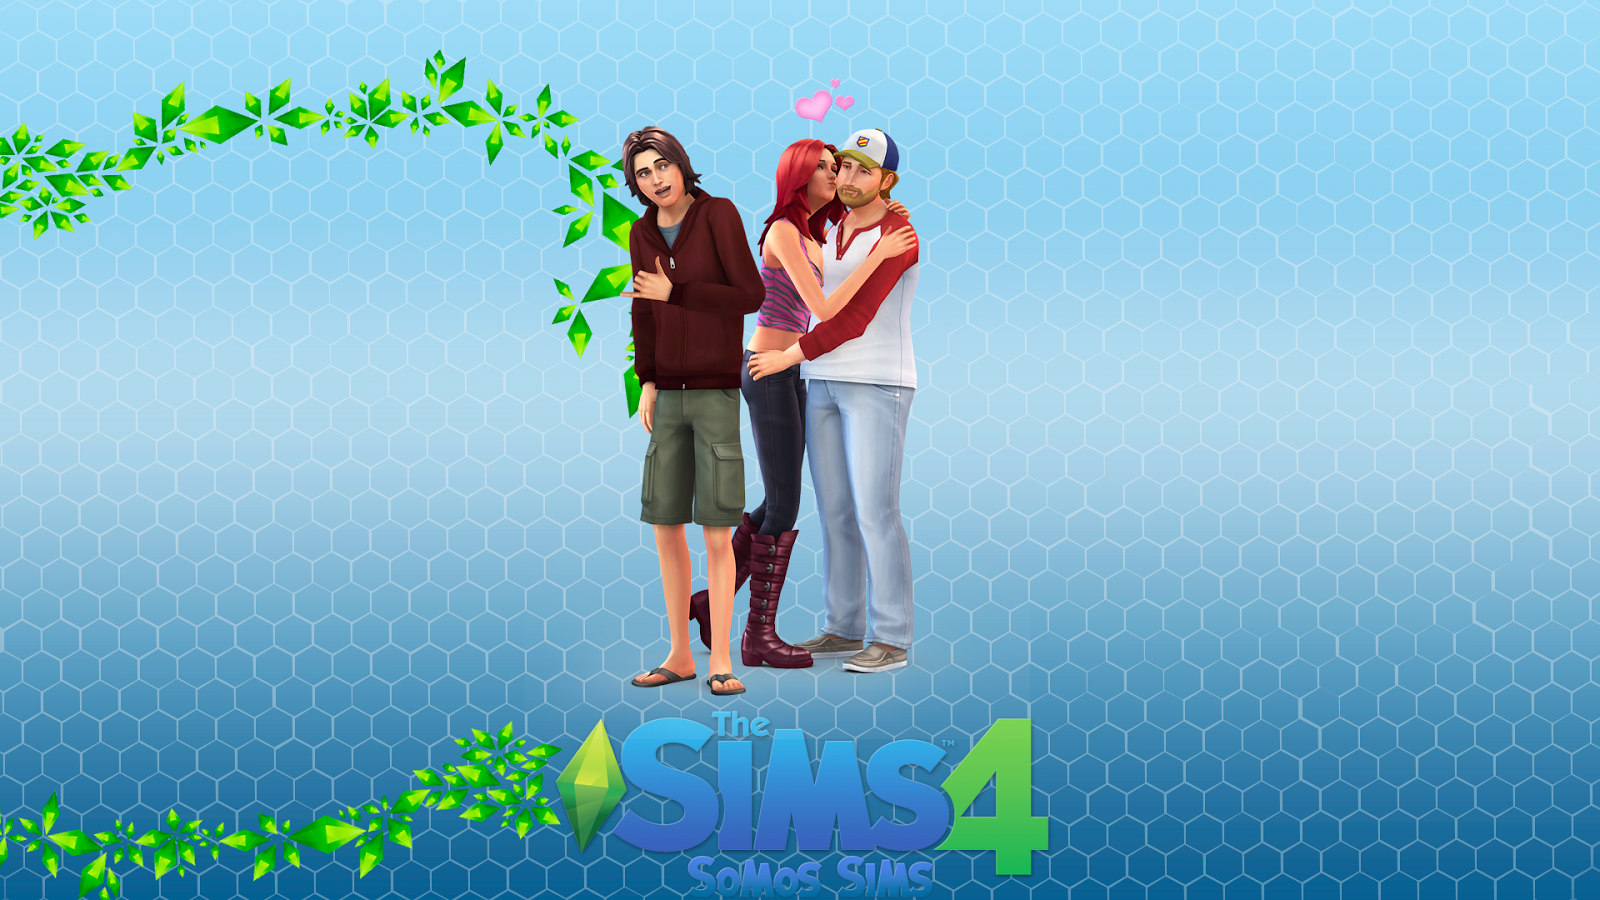 The Sims Wallpaper Games Online HD